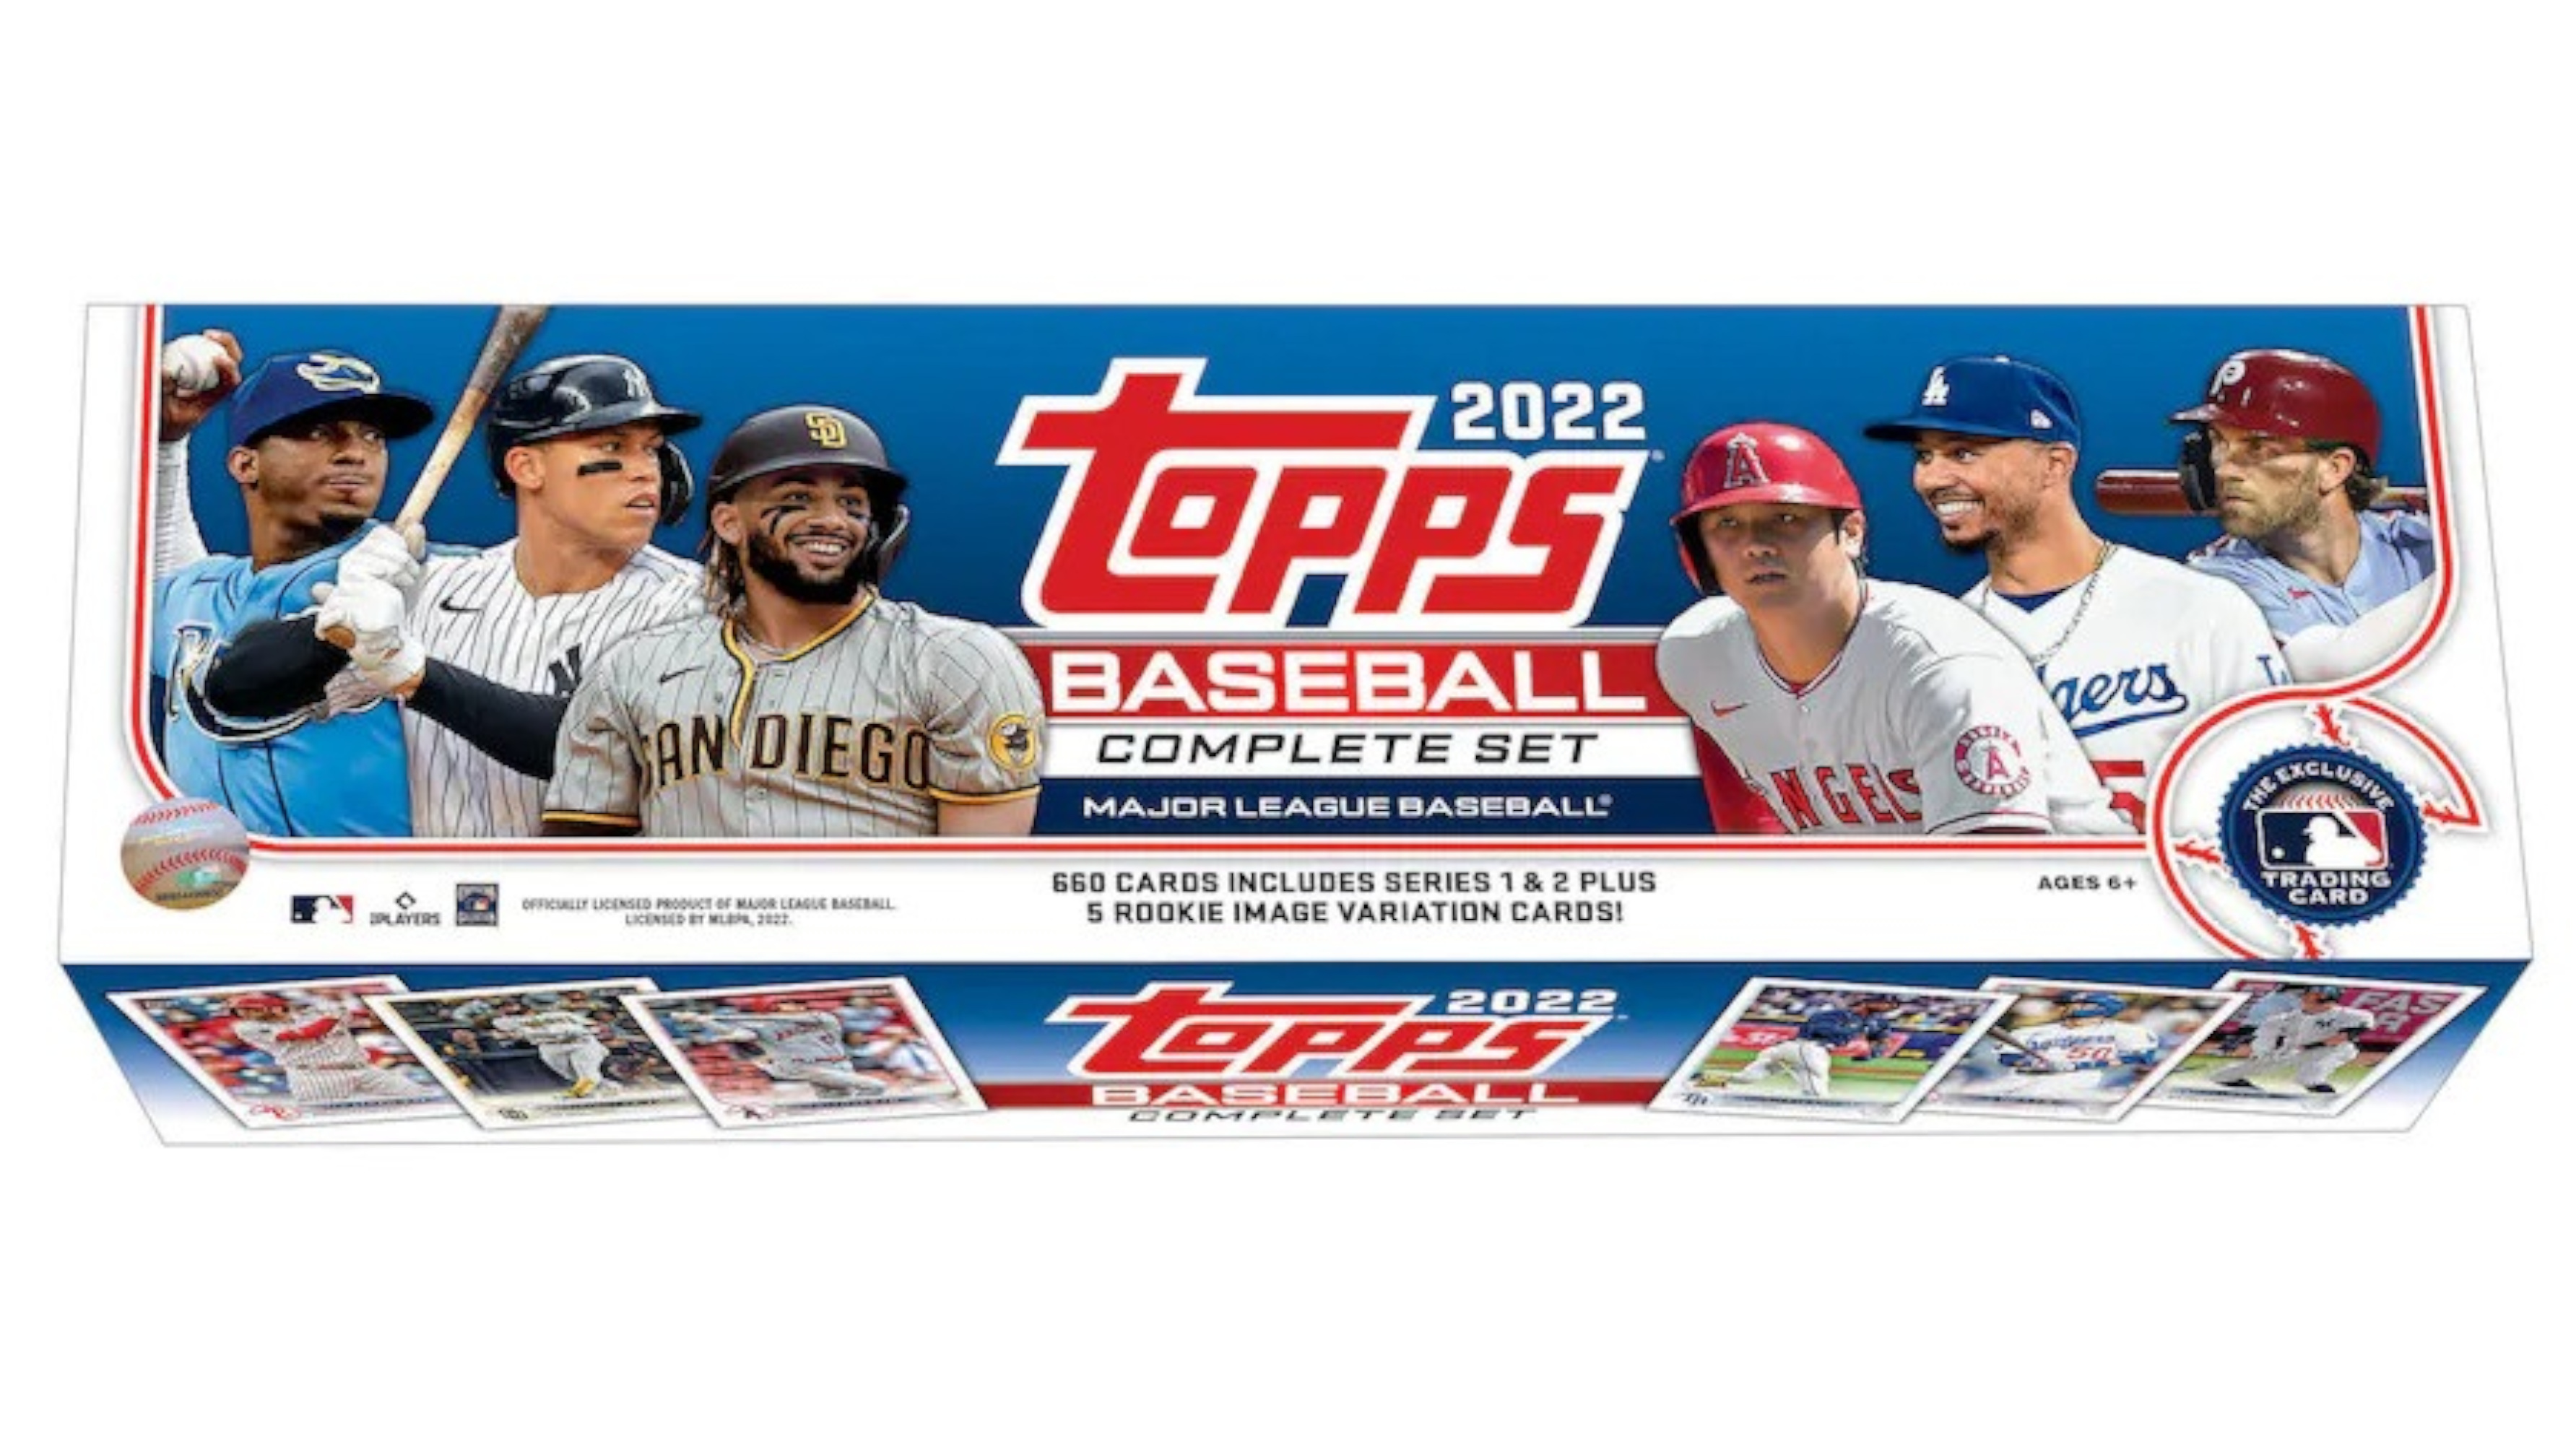 2022 Topps Baseball Complete Set Trading Cards - Walmart Special Edition - image 1 of 4